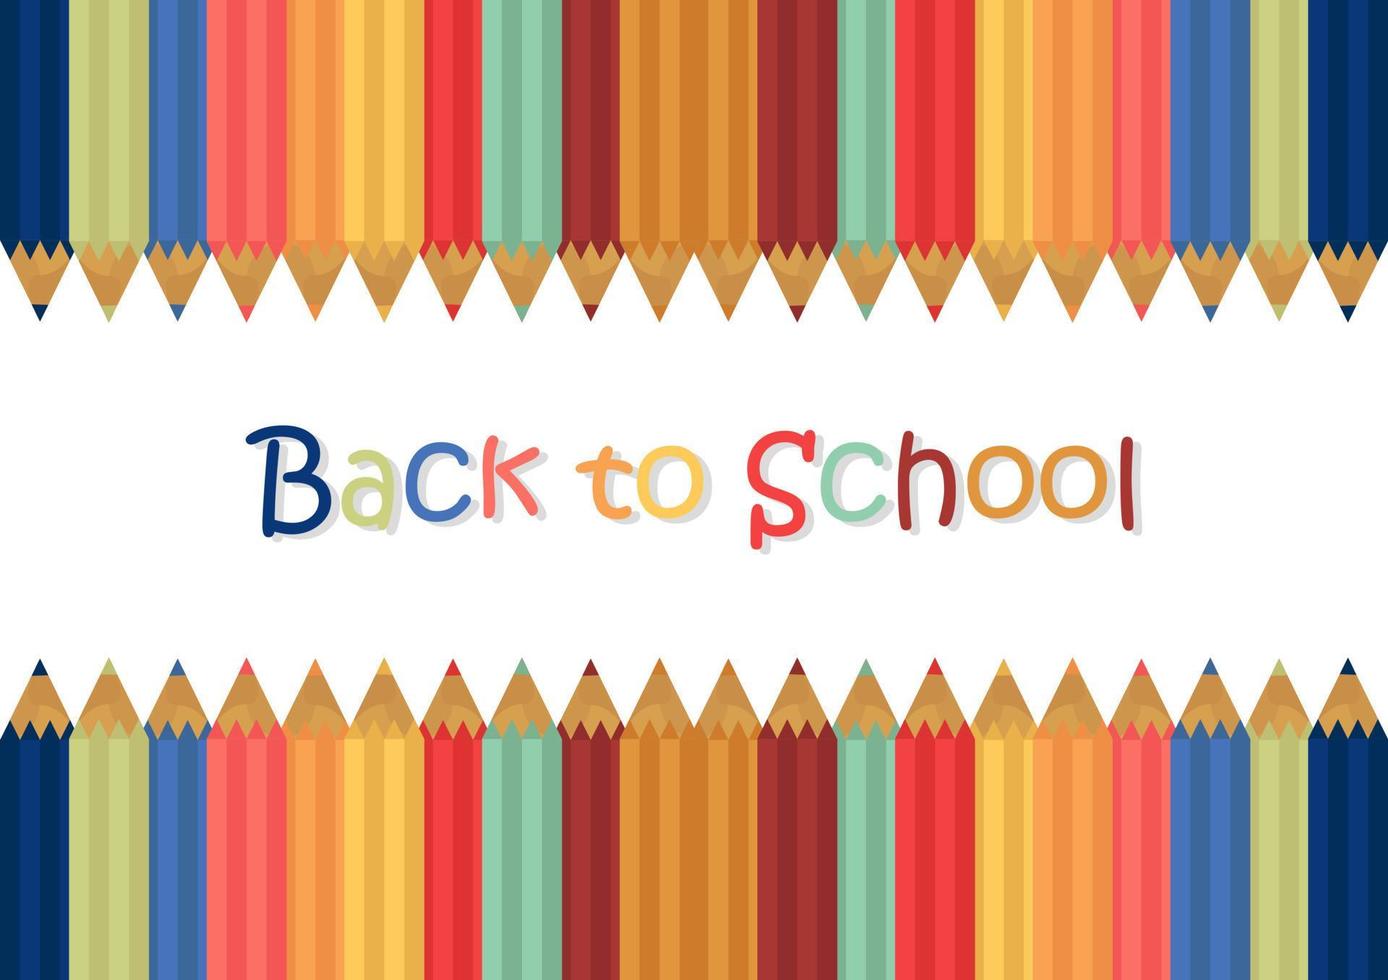 back to school theme background 2 vector